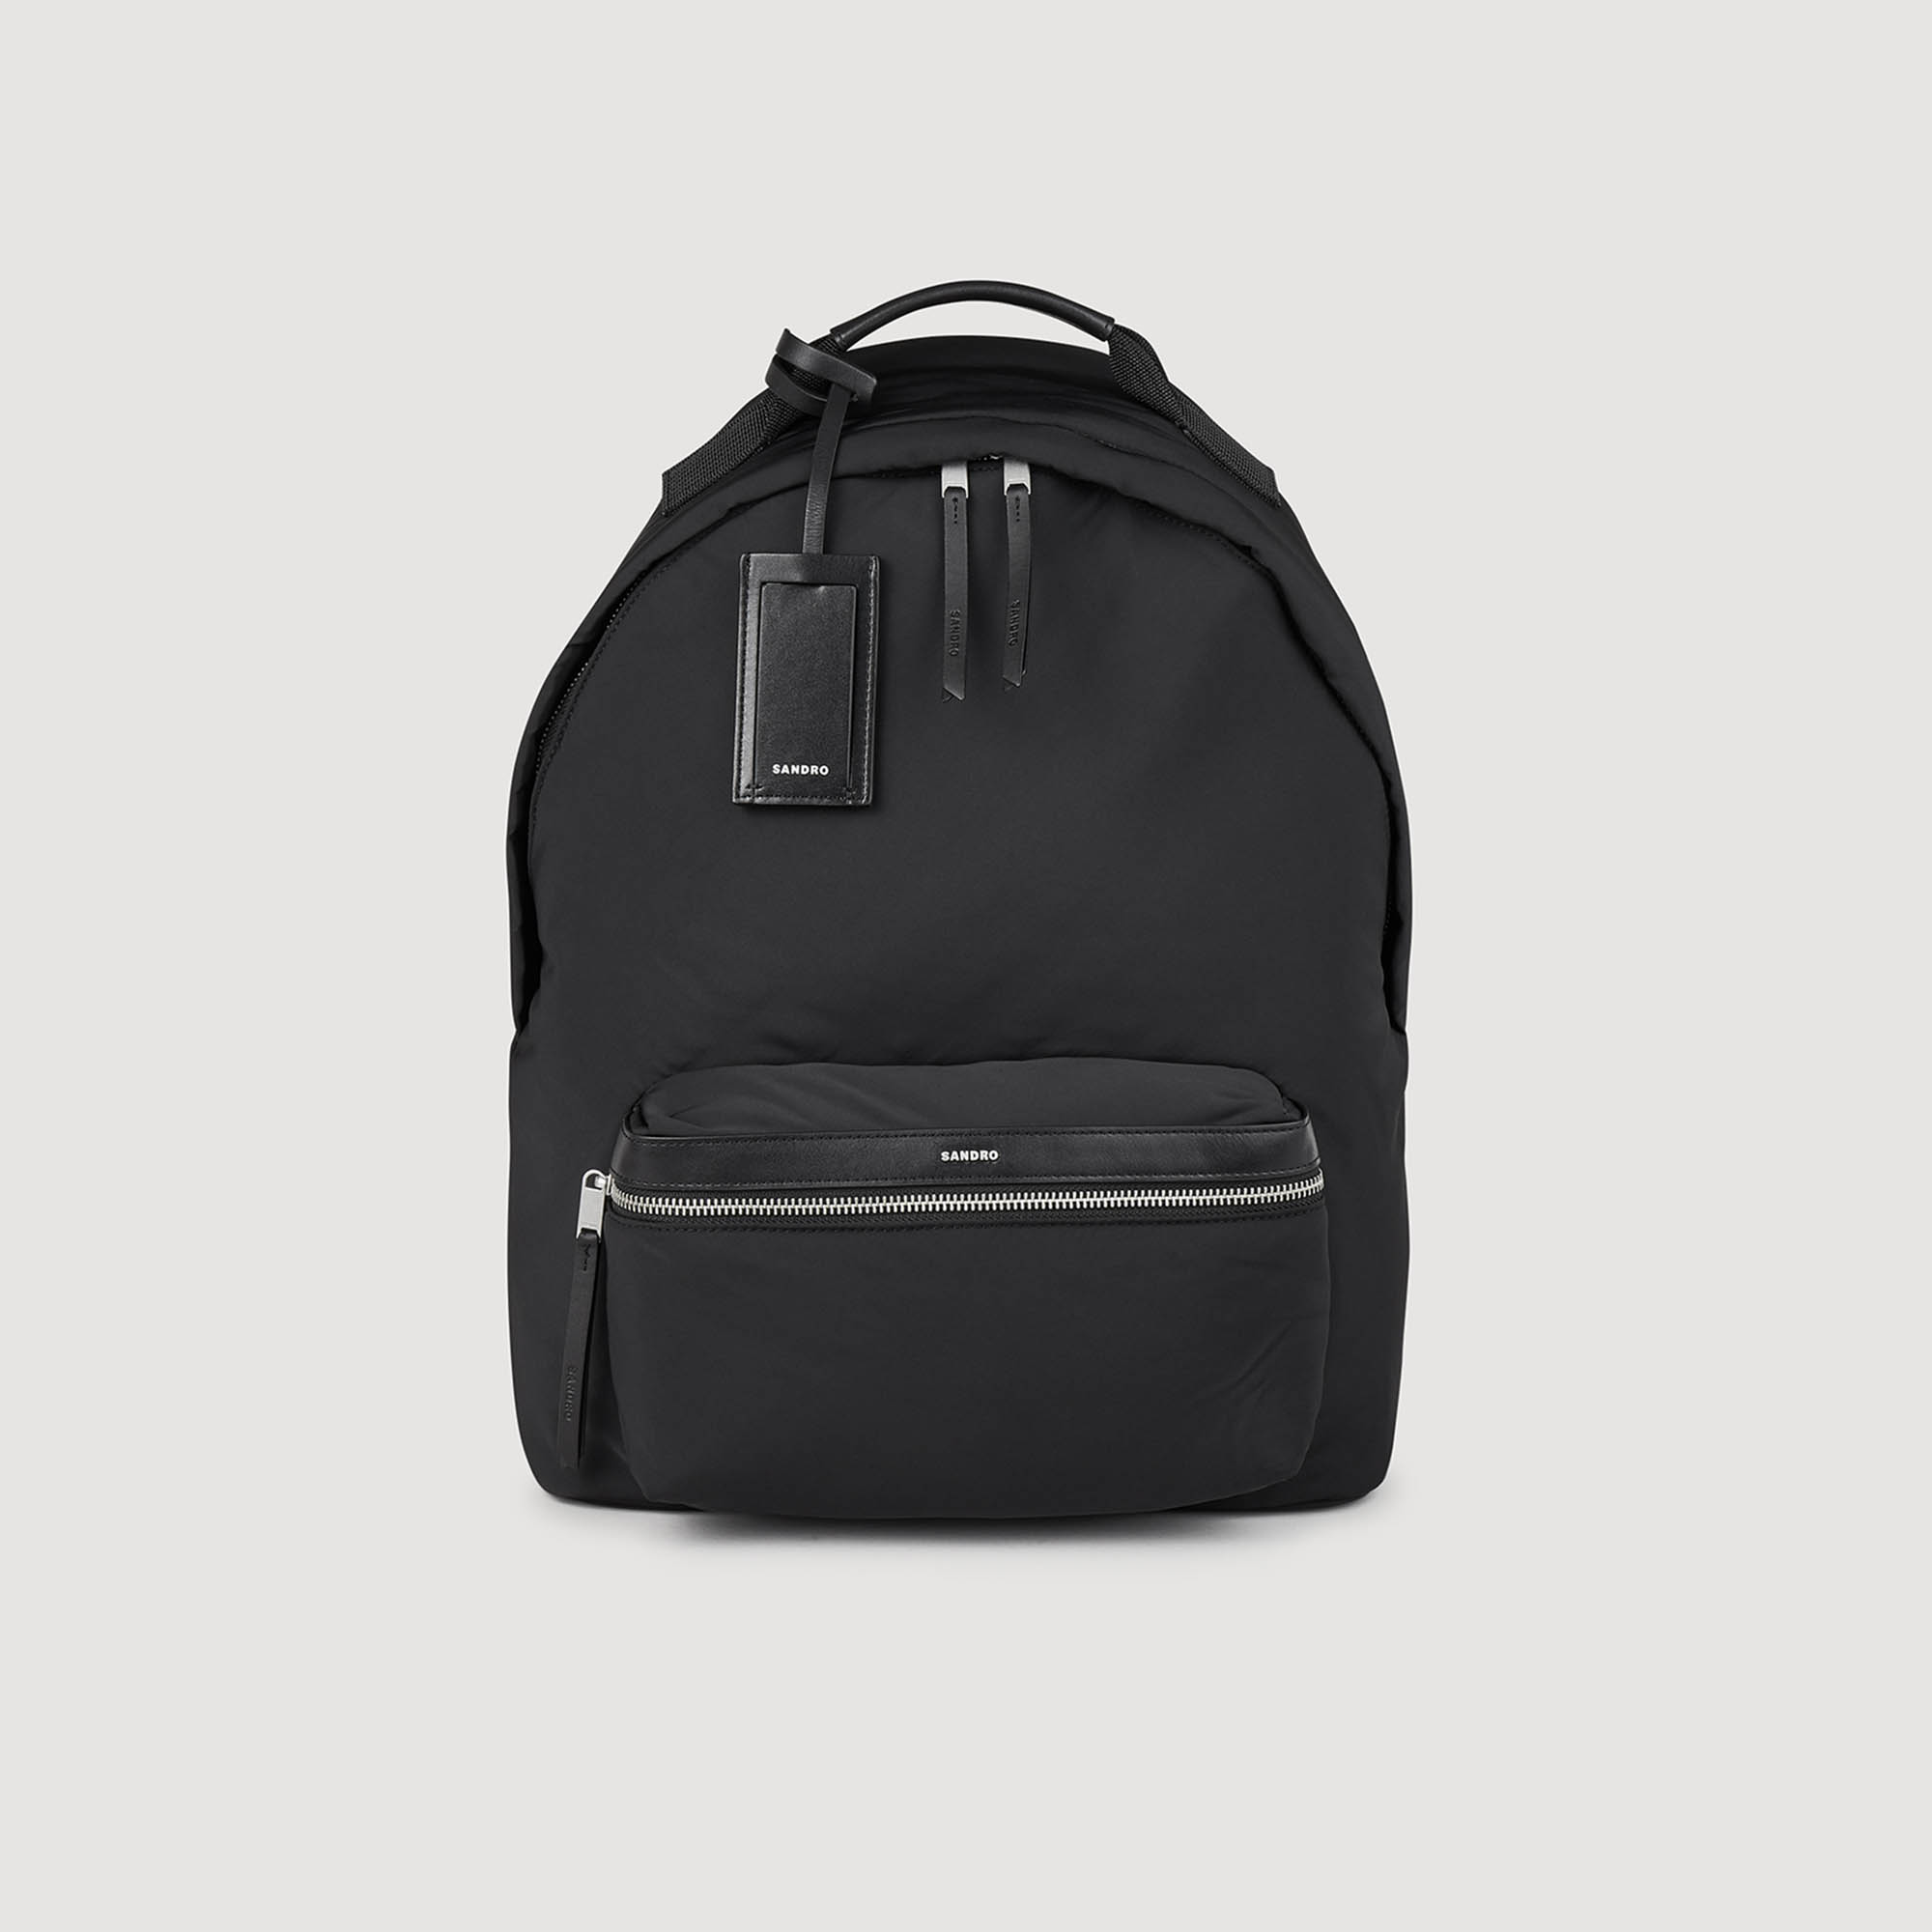 Sandro polyester Lining: Canvas backpack with leather details, featuring a zip fastening with Sandro embossed pull tab, front zip pocket, label holder, internal storage pocket, and adjustable padded straps